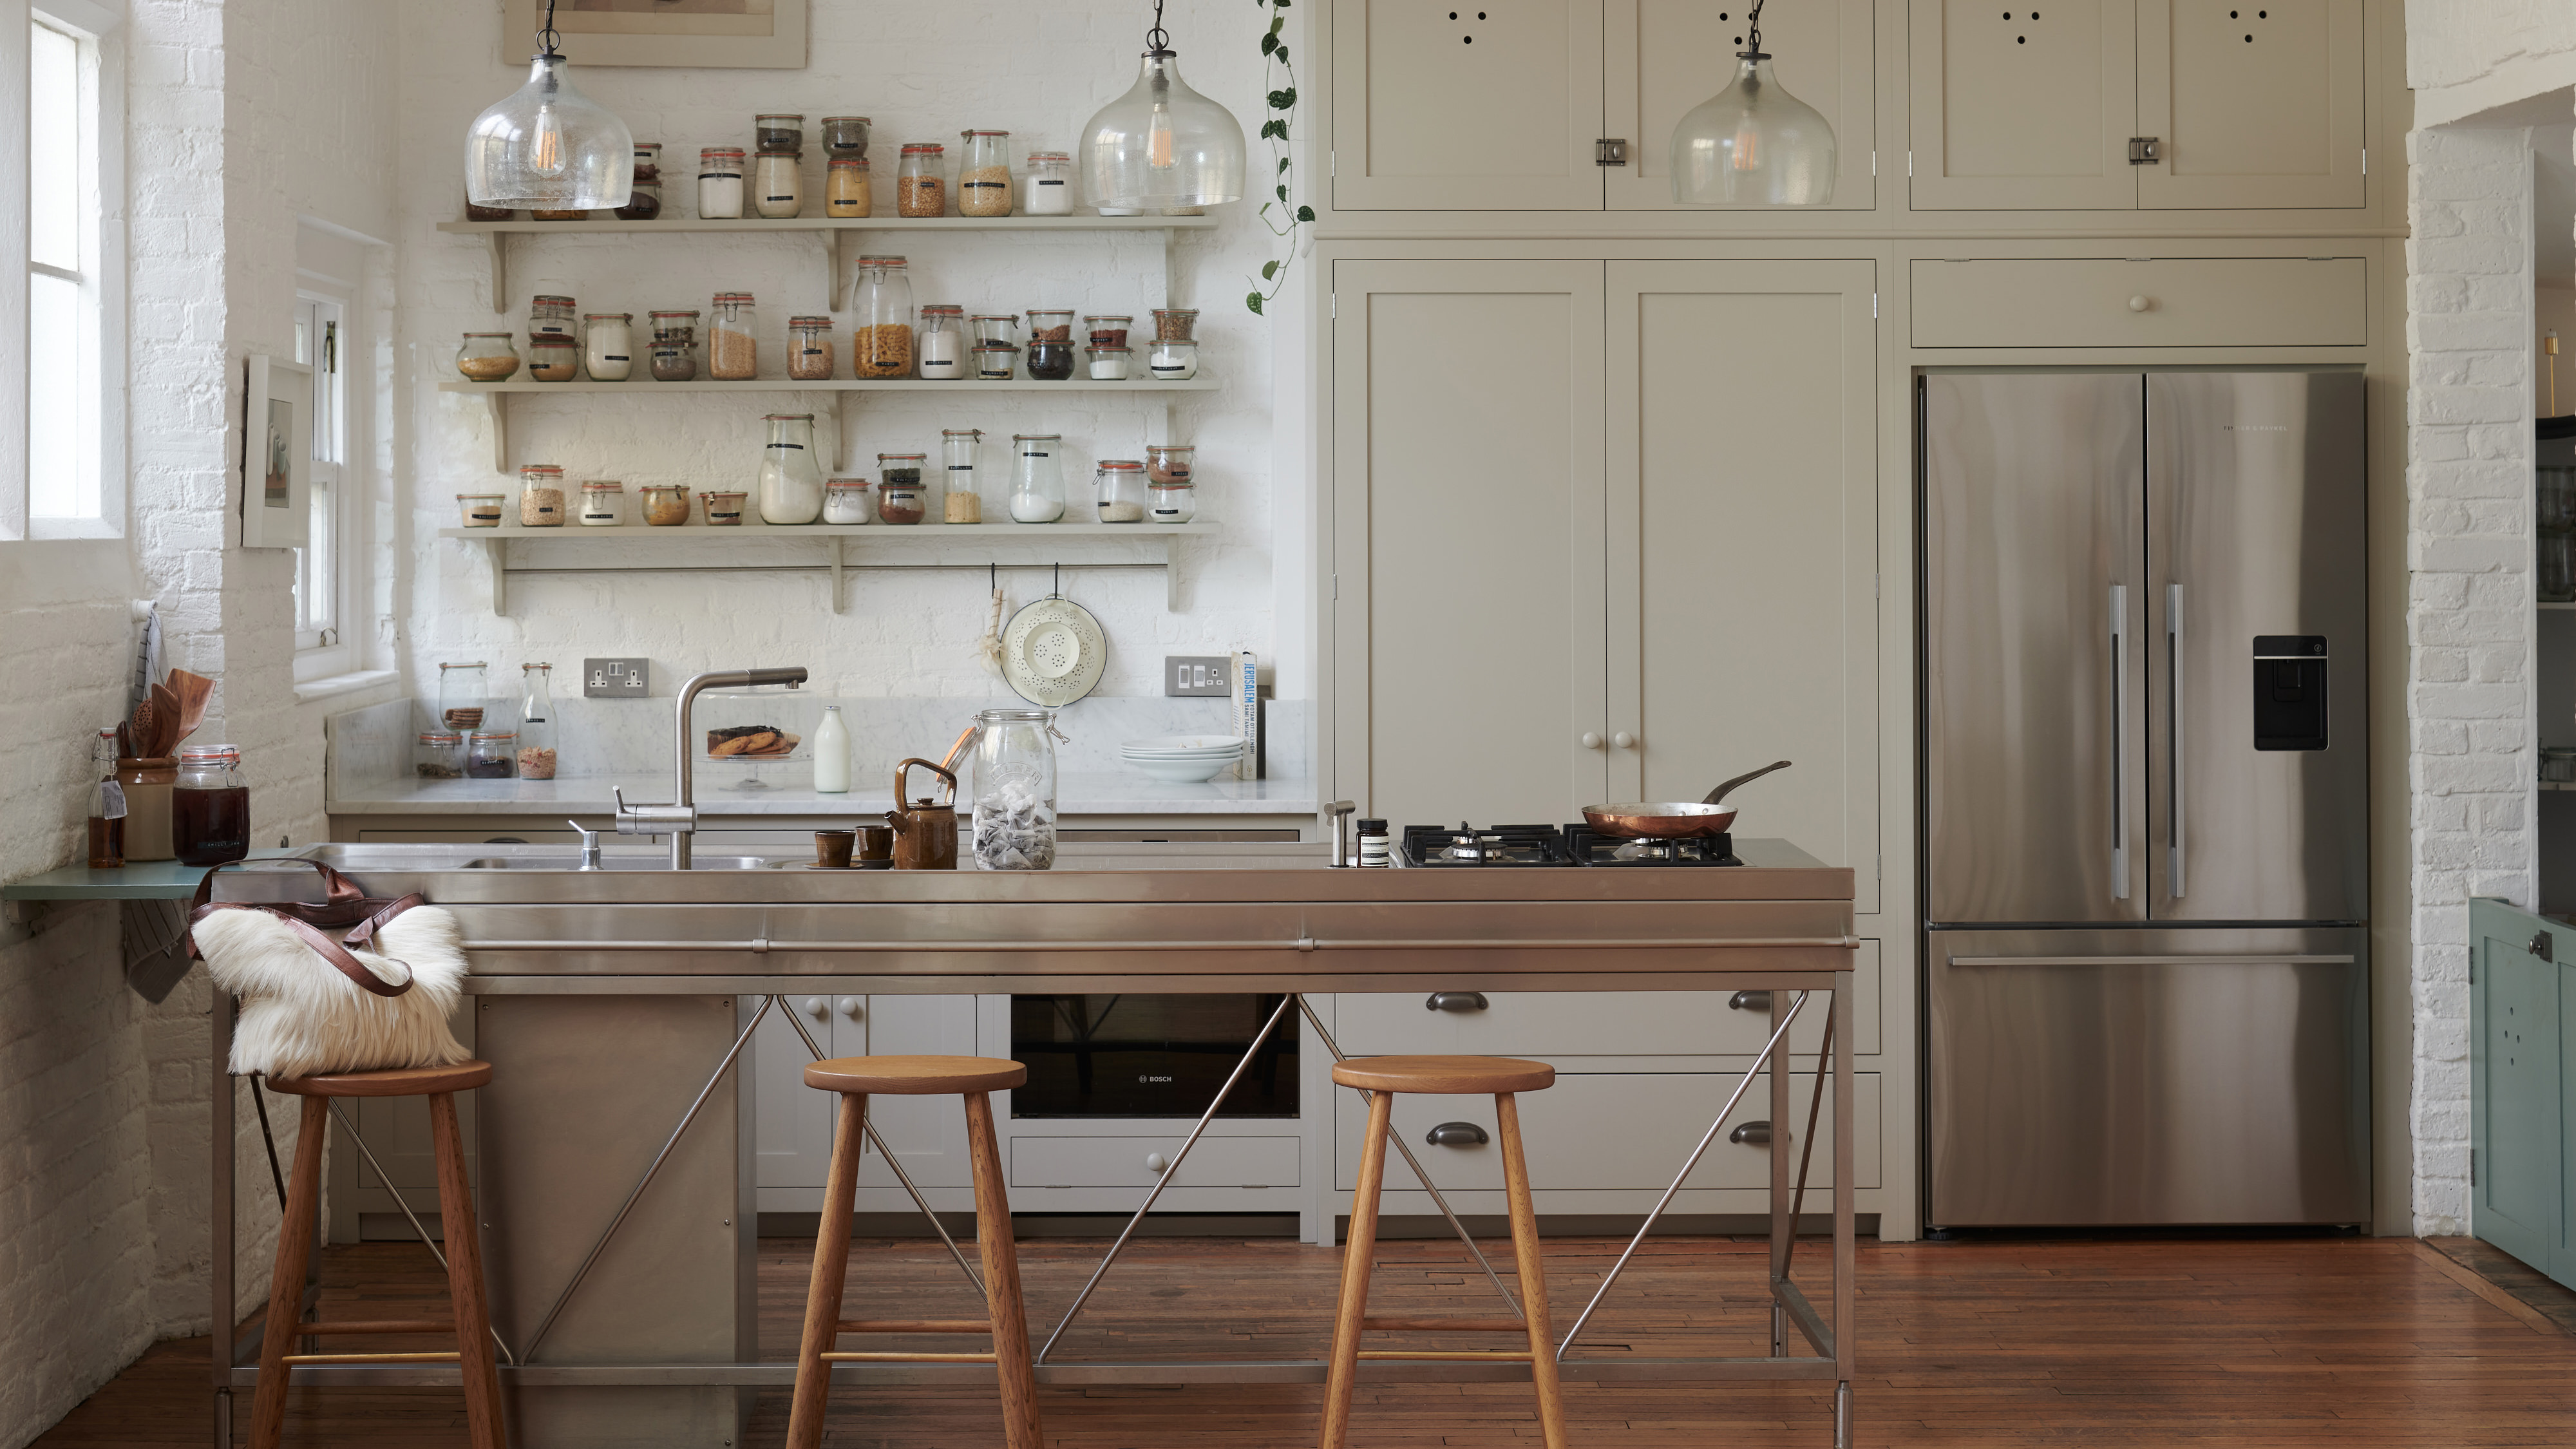 Industrial style kitchens are absolutely trendy 